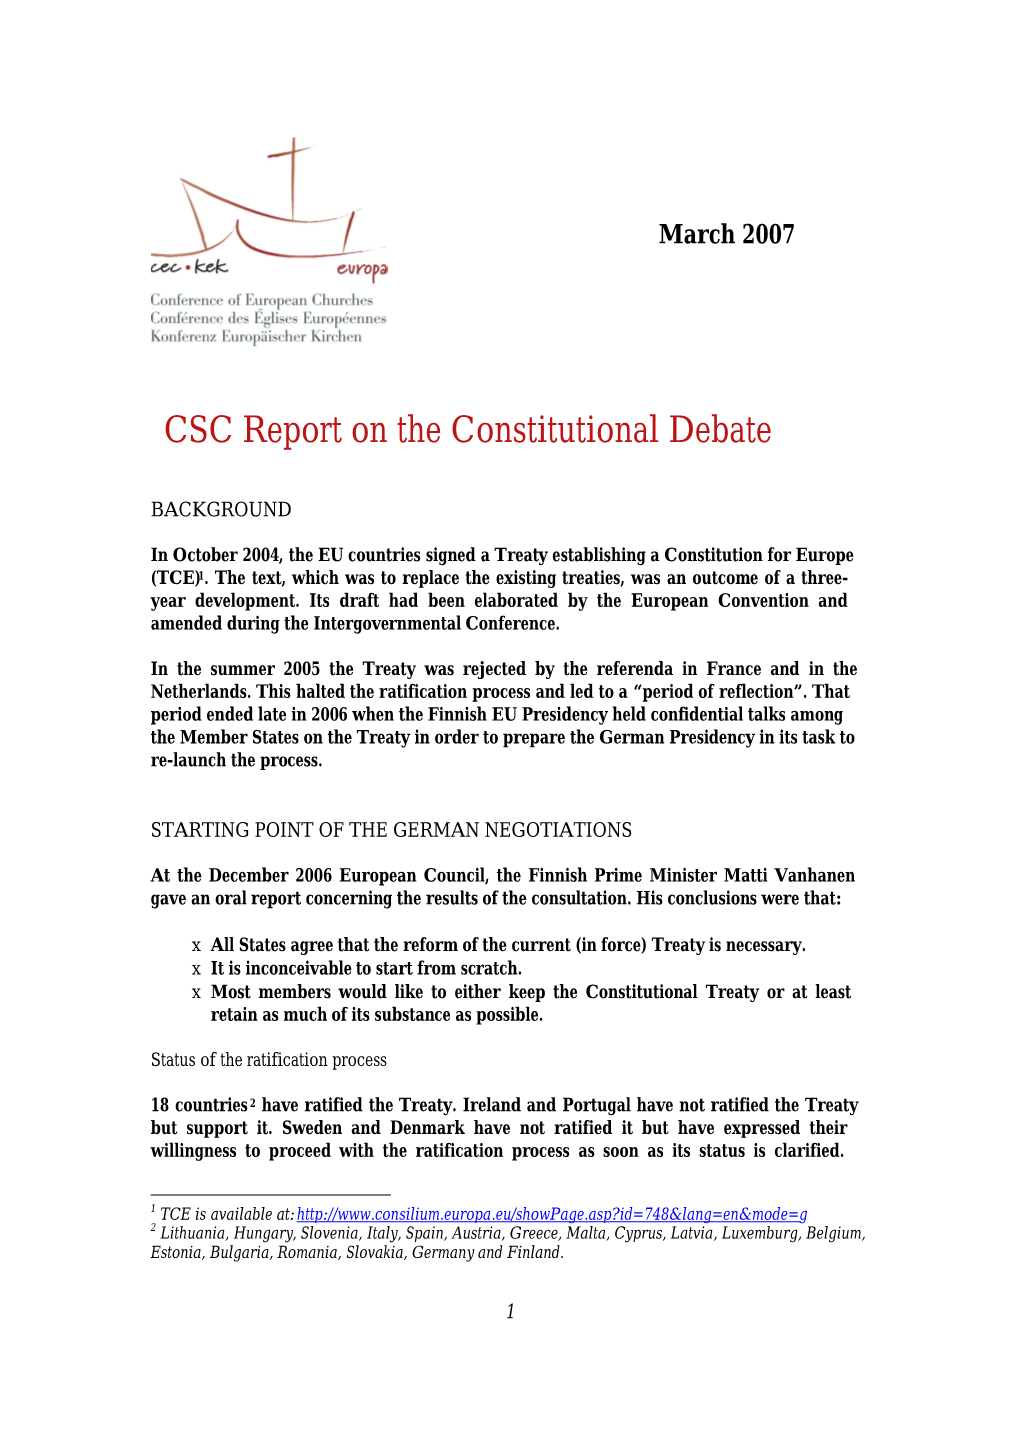 CSC Report on the Constitutional Debate